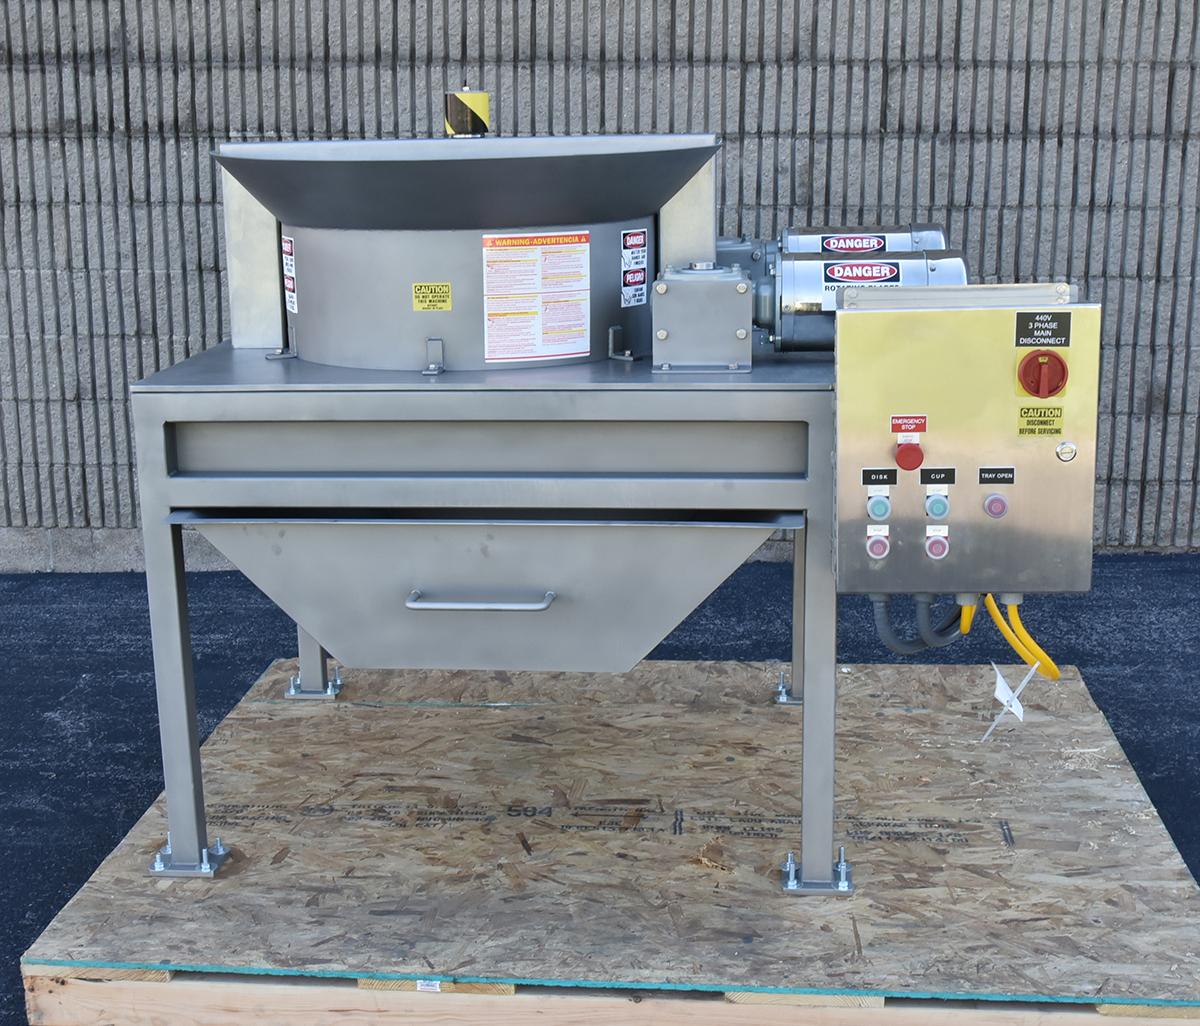 NEWCommercial CABBAGE CUTTER, 26 INCH, industrial-capacity food grade stainless steel, Alard Equipment Corp item Y5337